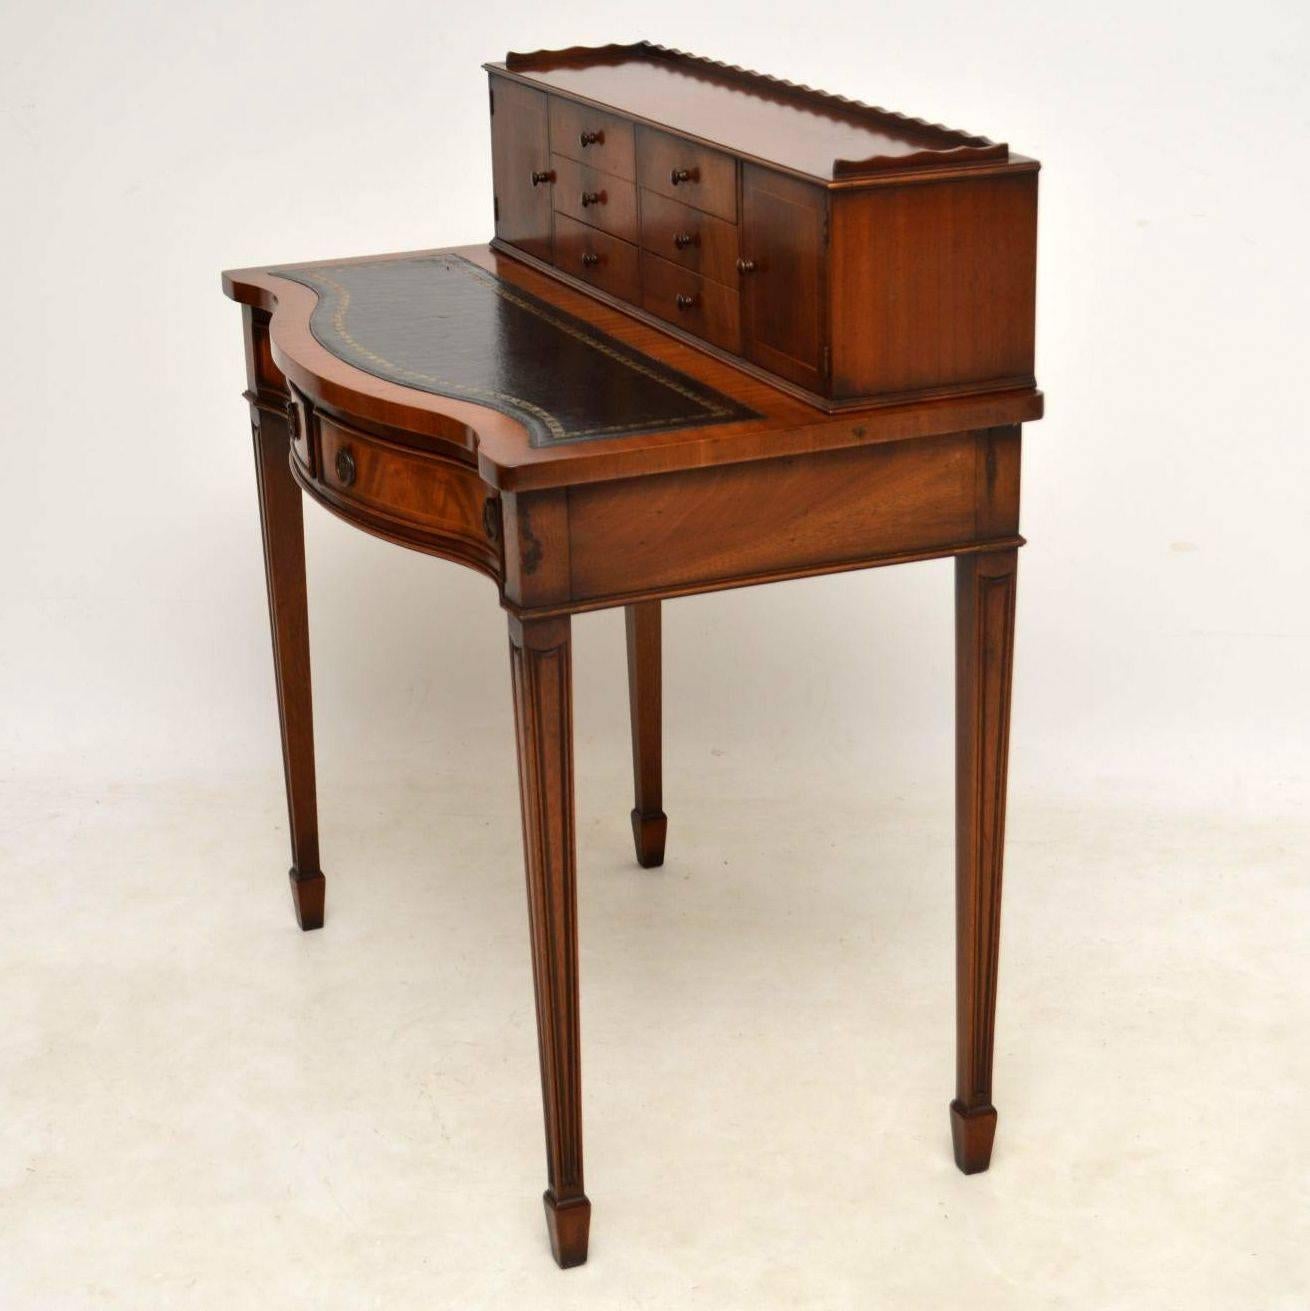 Mid-20th Century Antique Mahogany Desk or Writing Table